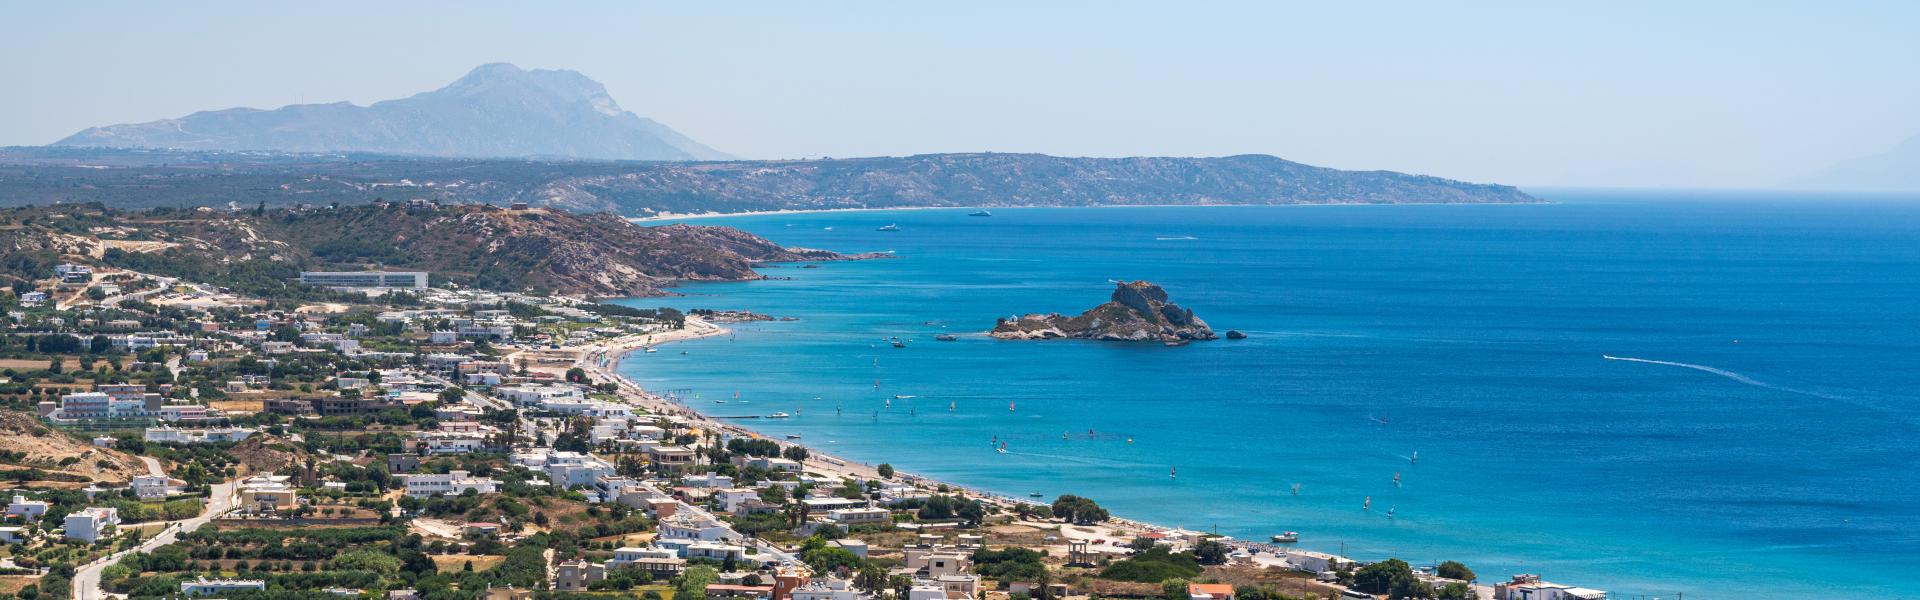 Kos is one of the most touristic islands in Greece. This is partly due to its long beaches. In this photo is the beach of Kefalos to the south side of the island.